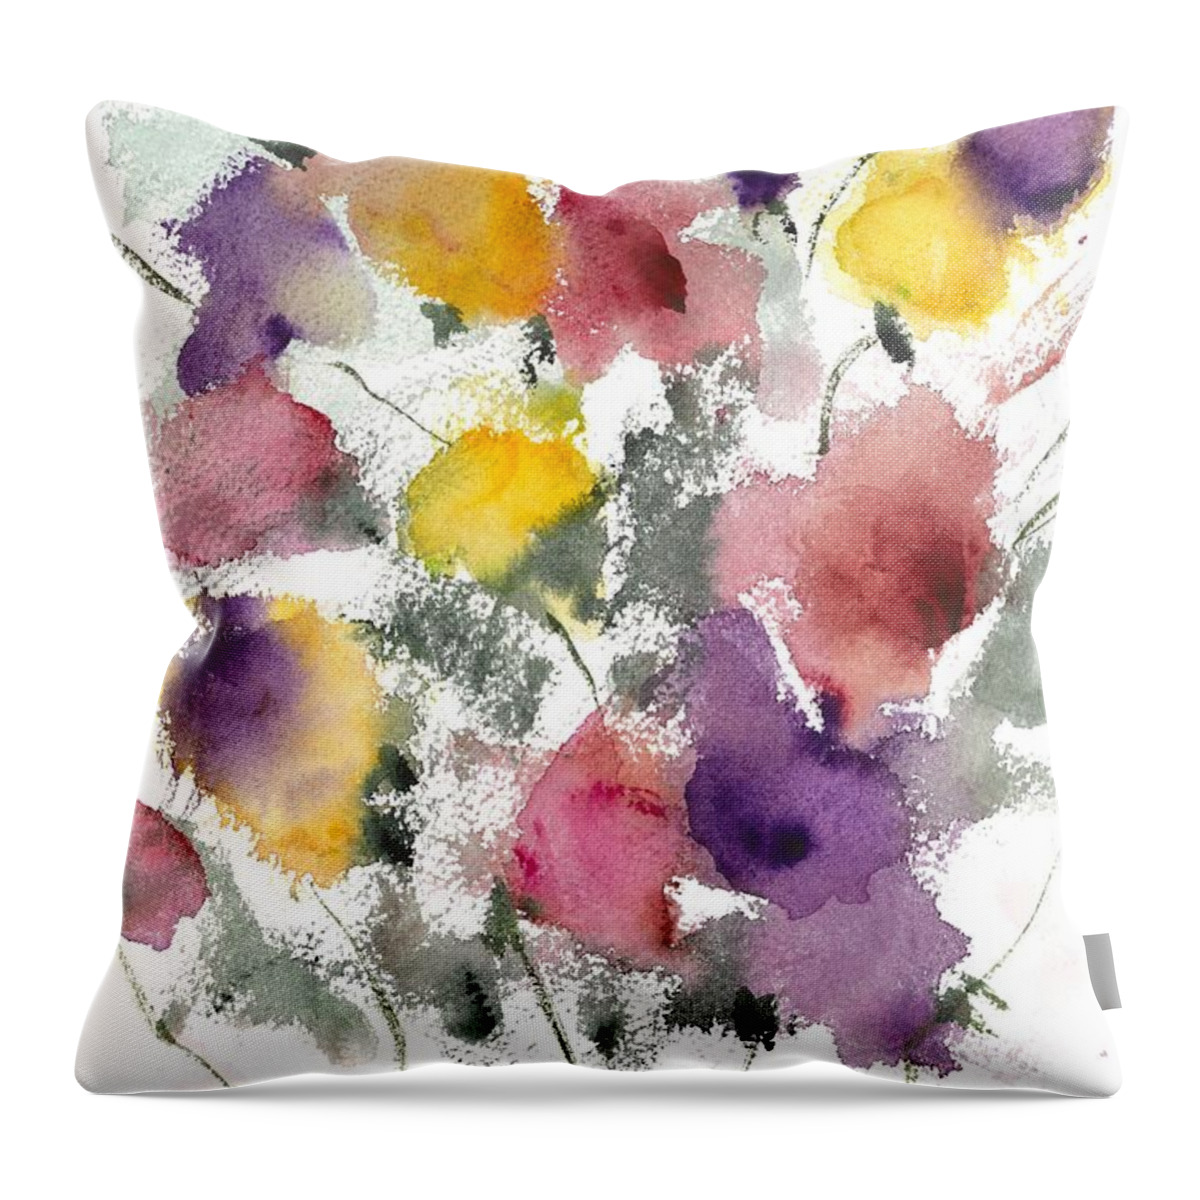 Water Throw Pillow featuring the painting Flowers by Loretta Coca